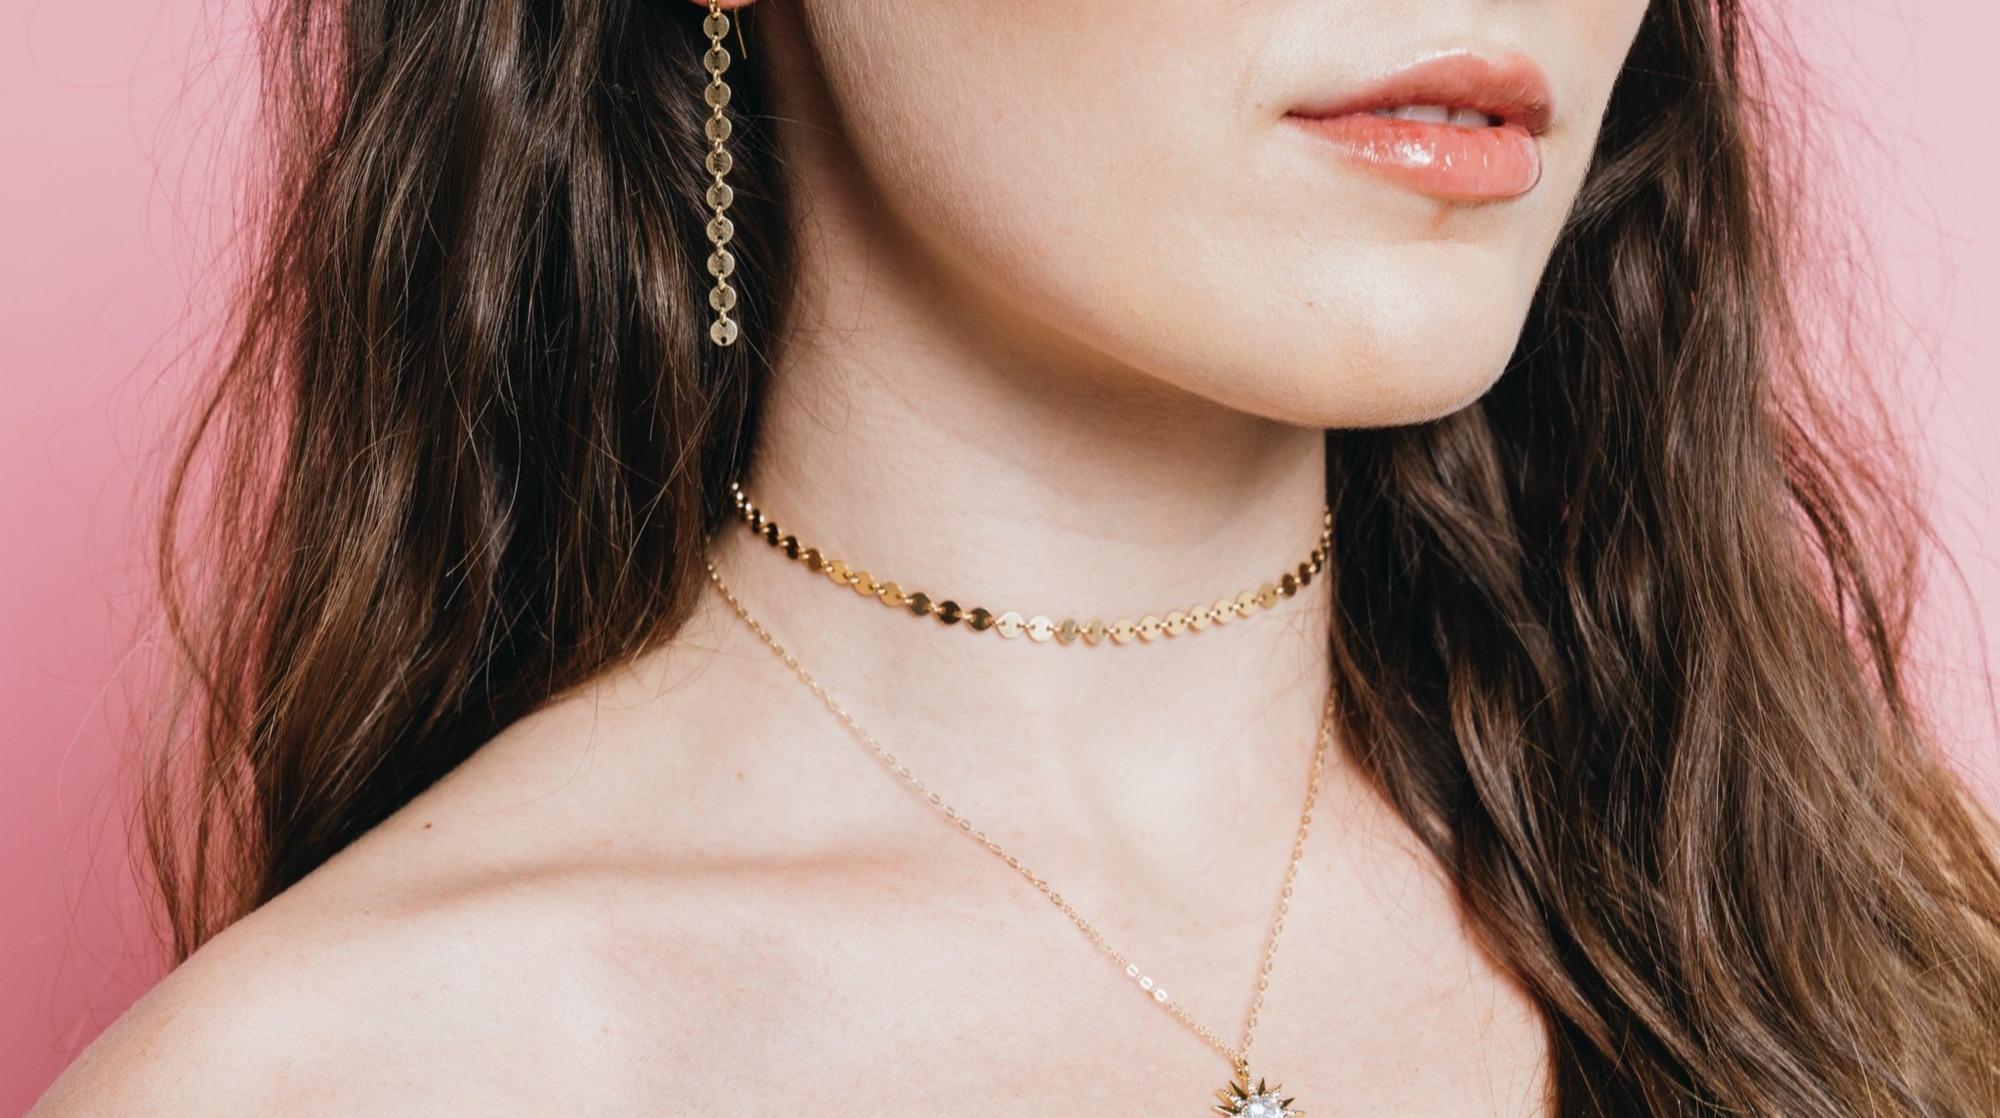 Amanda Deer Jewelry dresses up any outfit with fine, delicate jewelry